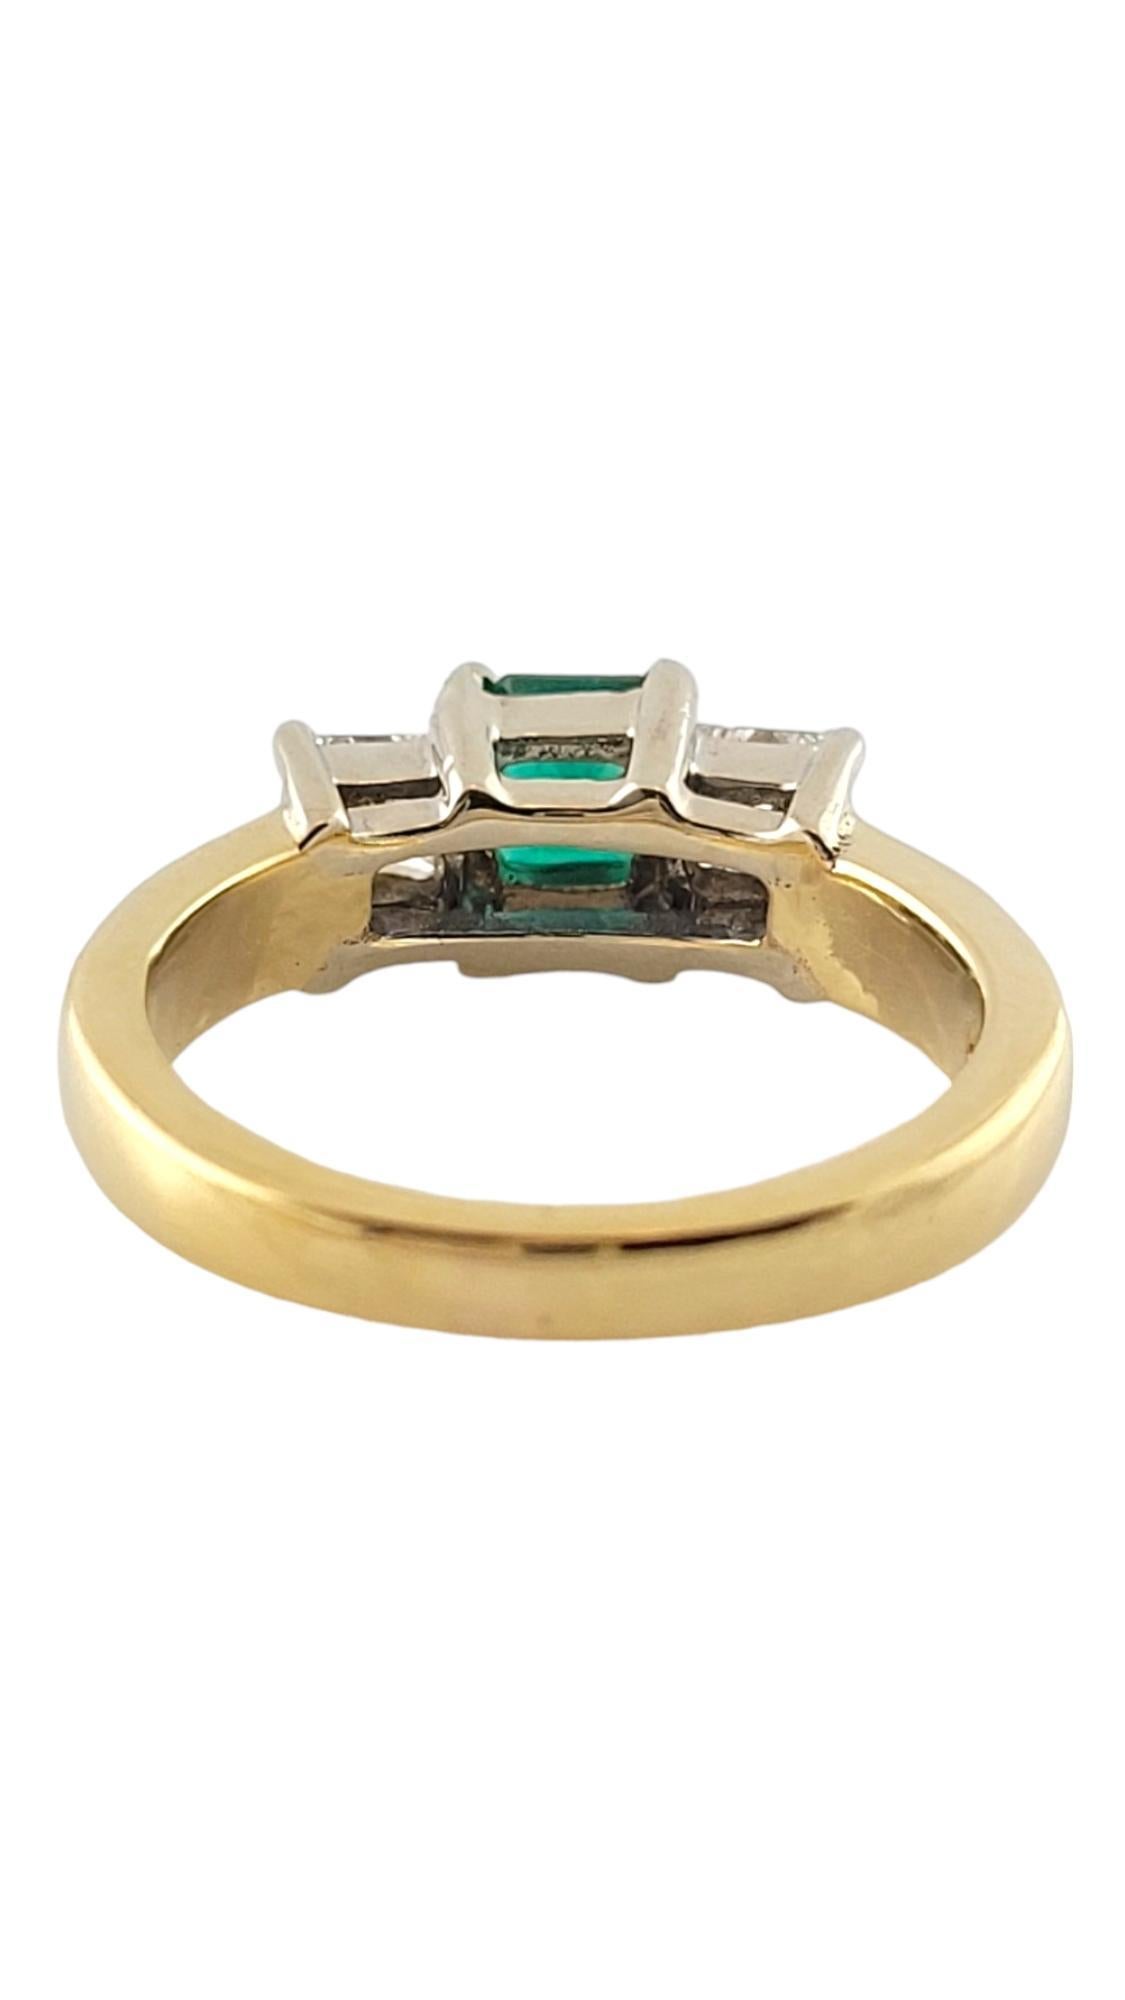 18 Karat Yellow Gold Natural Emerald and Diamond Ring Size 5.5 #16993 In Good Condition For Sale In Washington Depot, CT